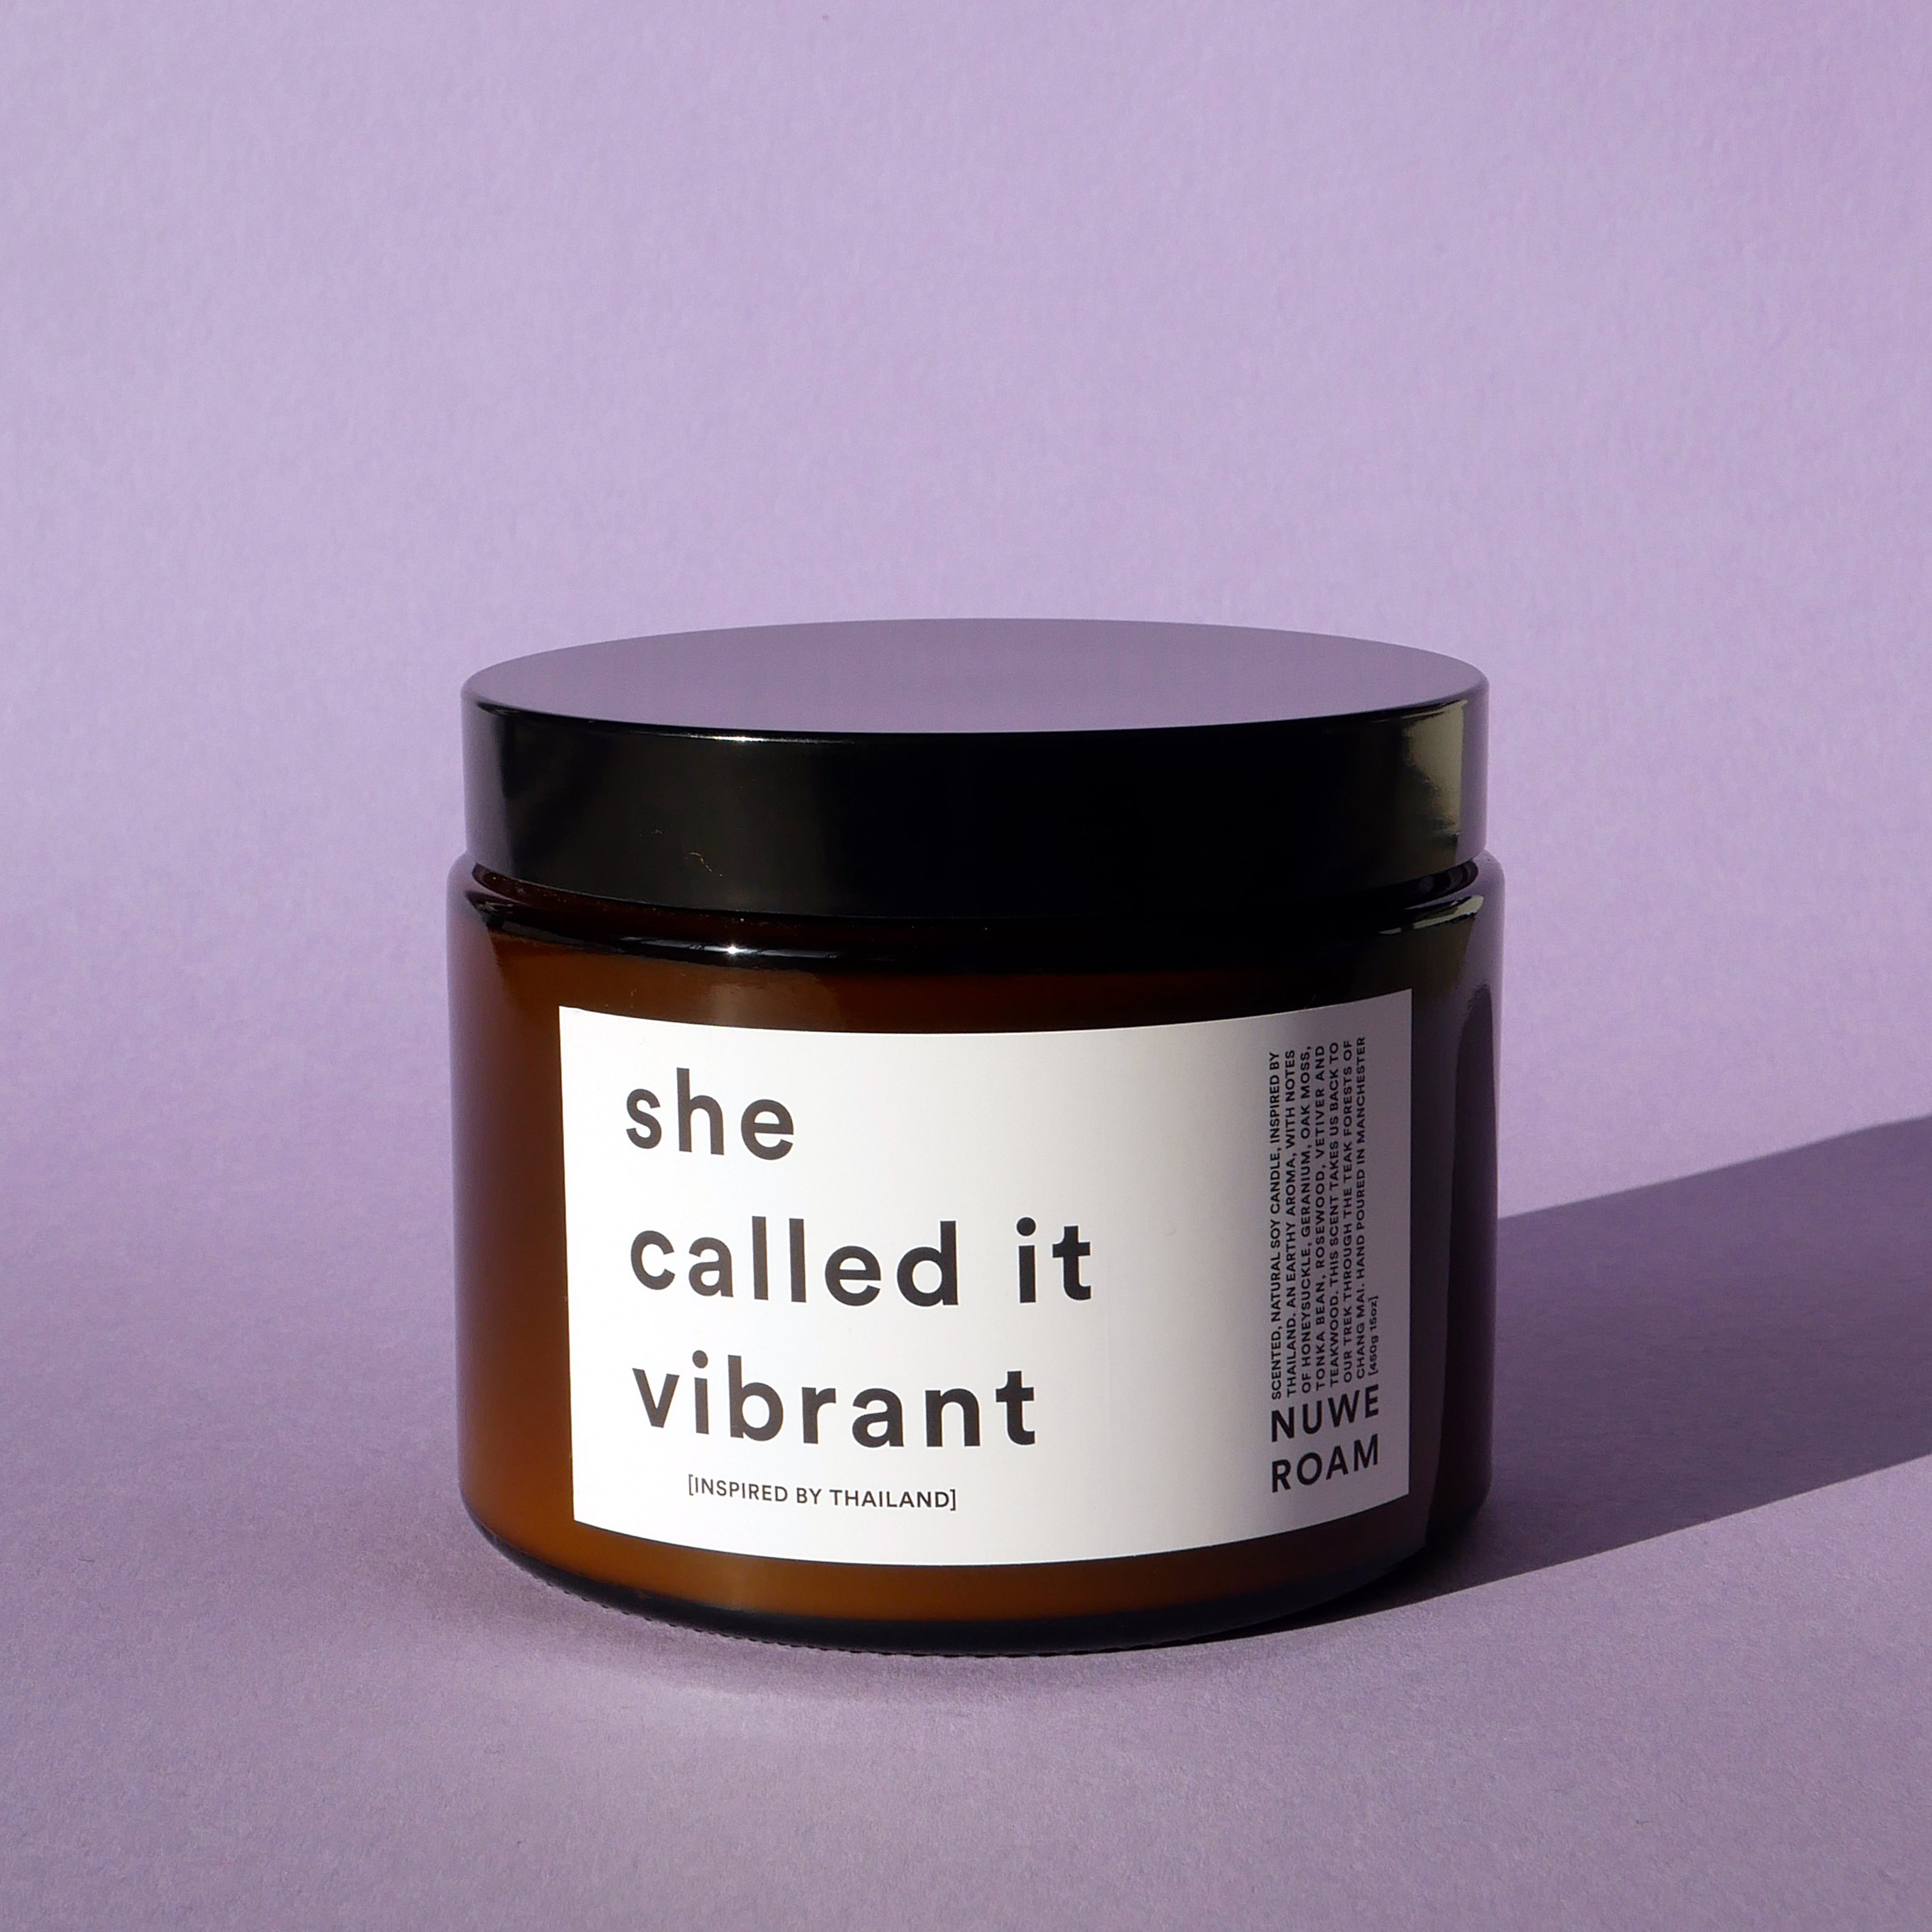 'SHE CALLED IT VIBRANT' TEAKWOOD SCENTED LARGE CANDLE